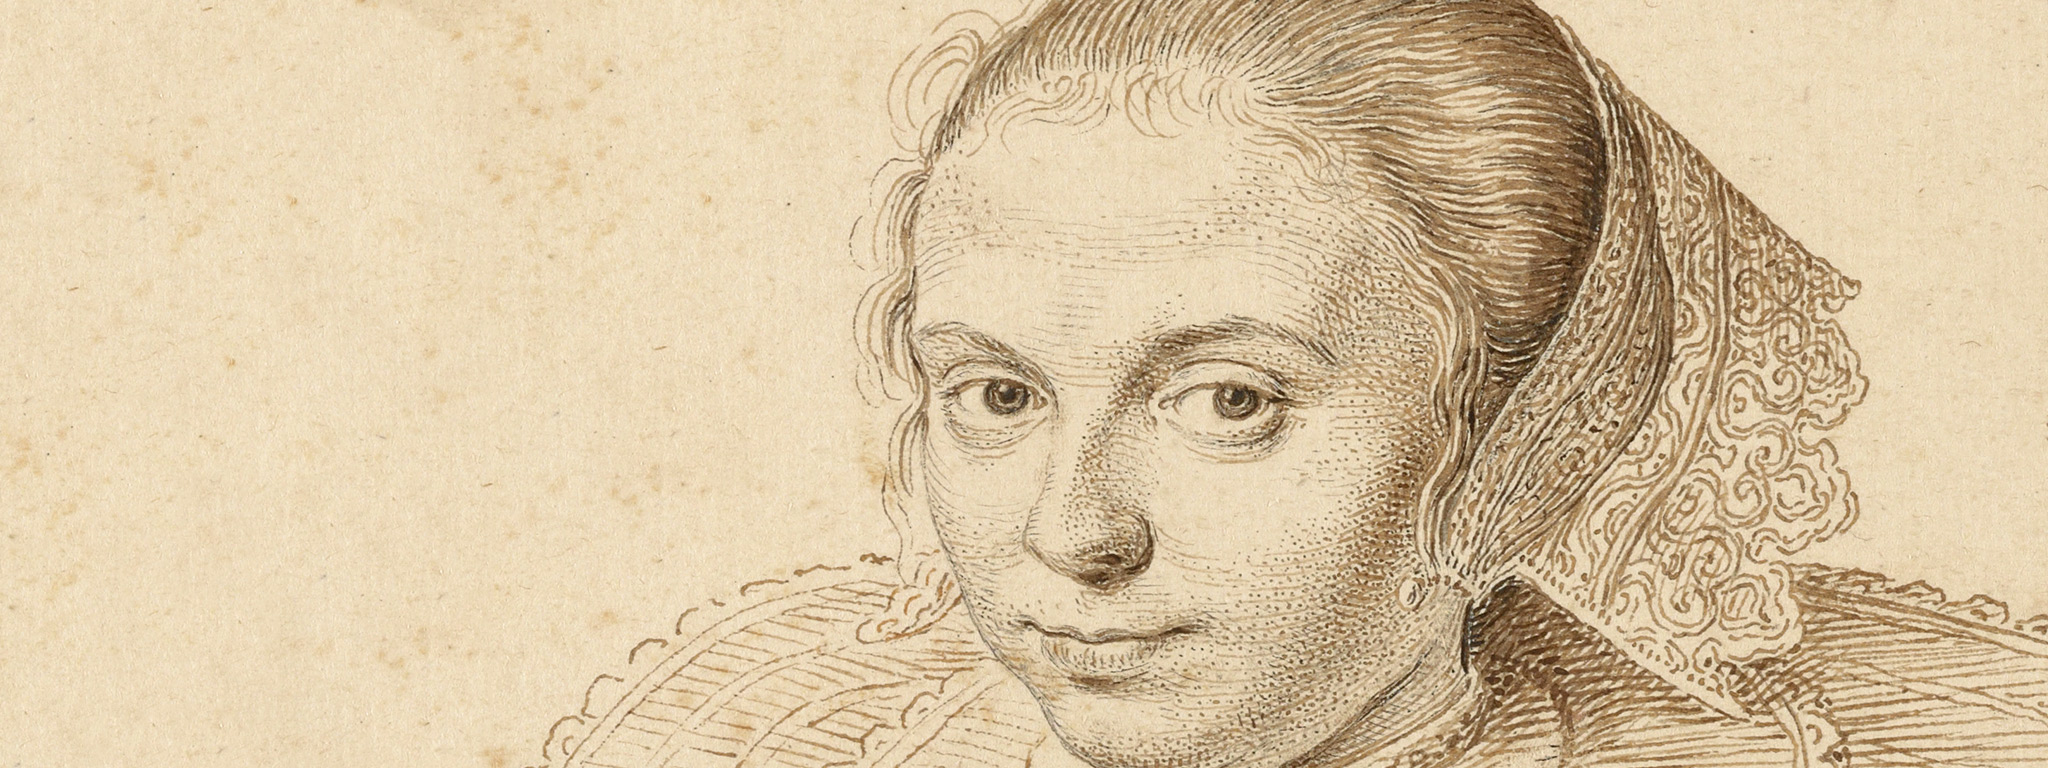 Portrait of a Woman (detail), 1629, David Bailly, light and dark brown ink; framing line in dark brown ink; pupils incised by the artist. The J. Paul Getty Museum